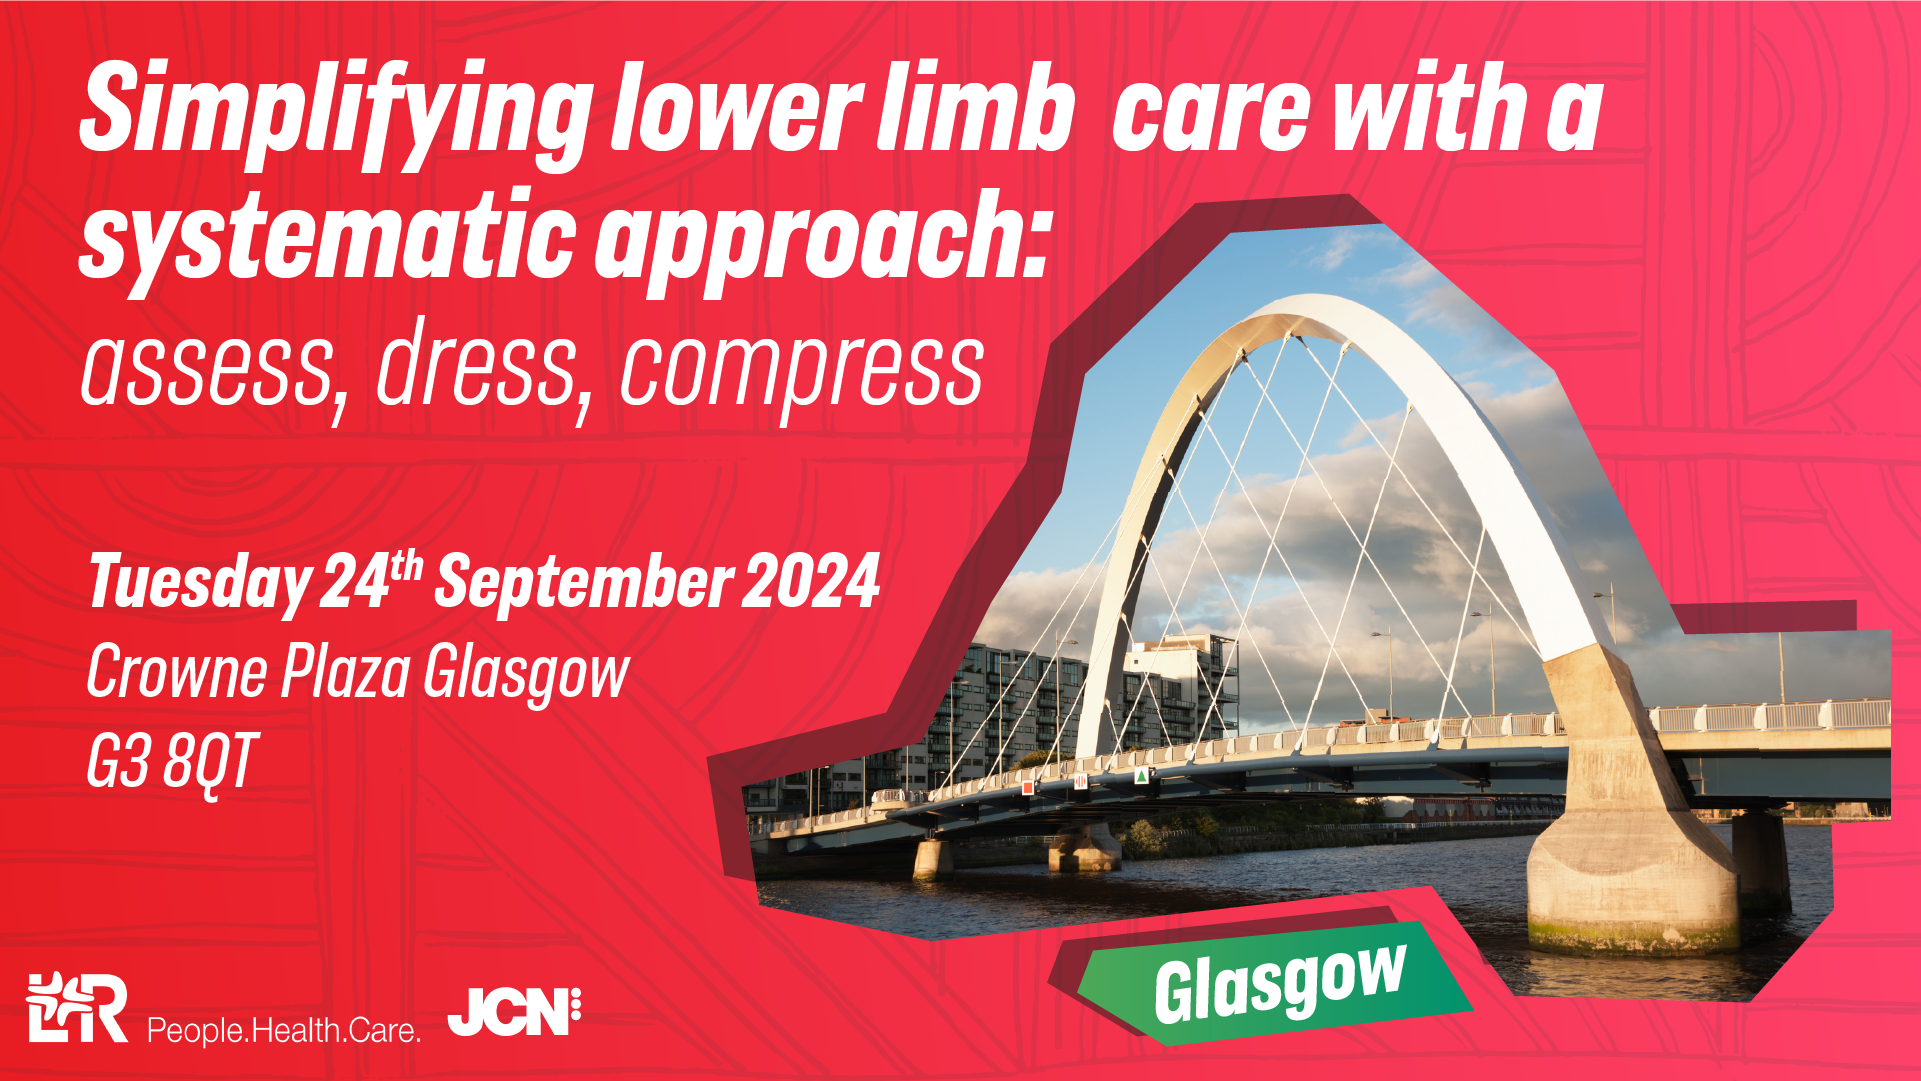 Simplifying Lower limb care with a systematic approach: assess, dress, compress - Glasgow